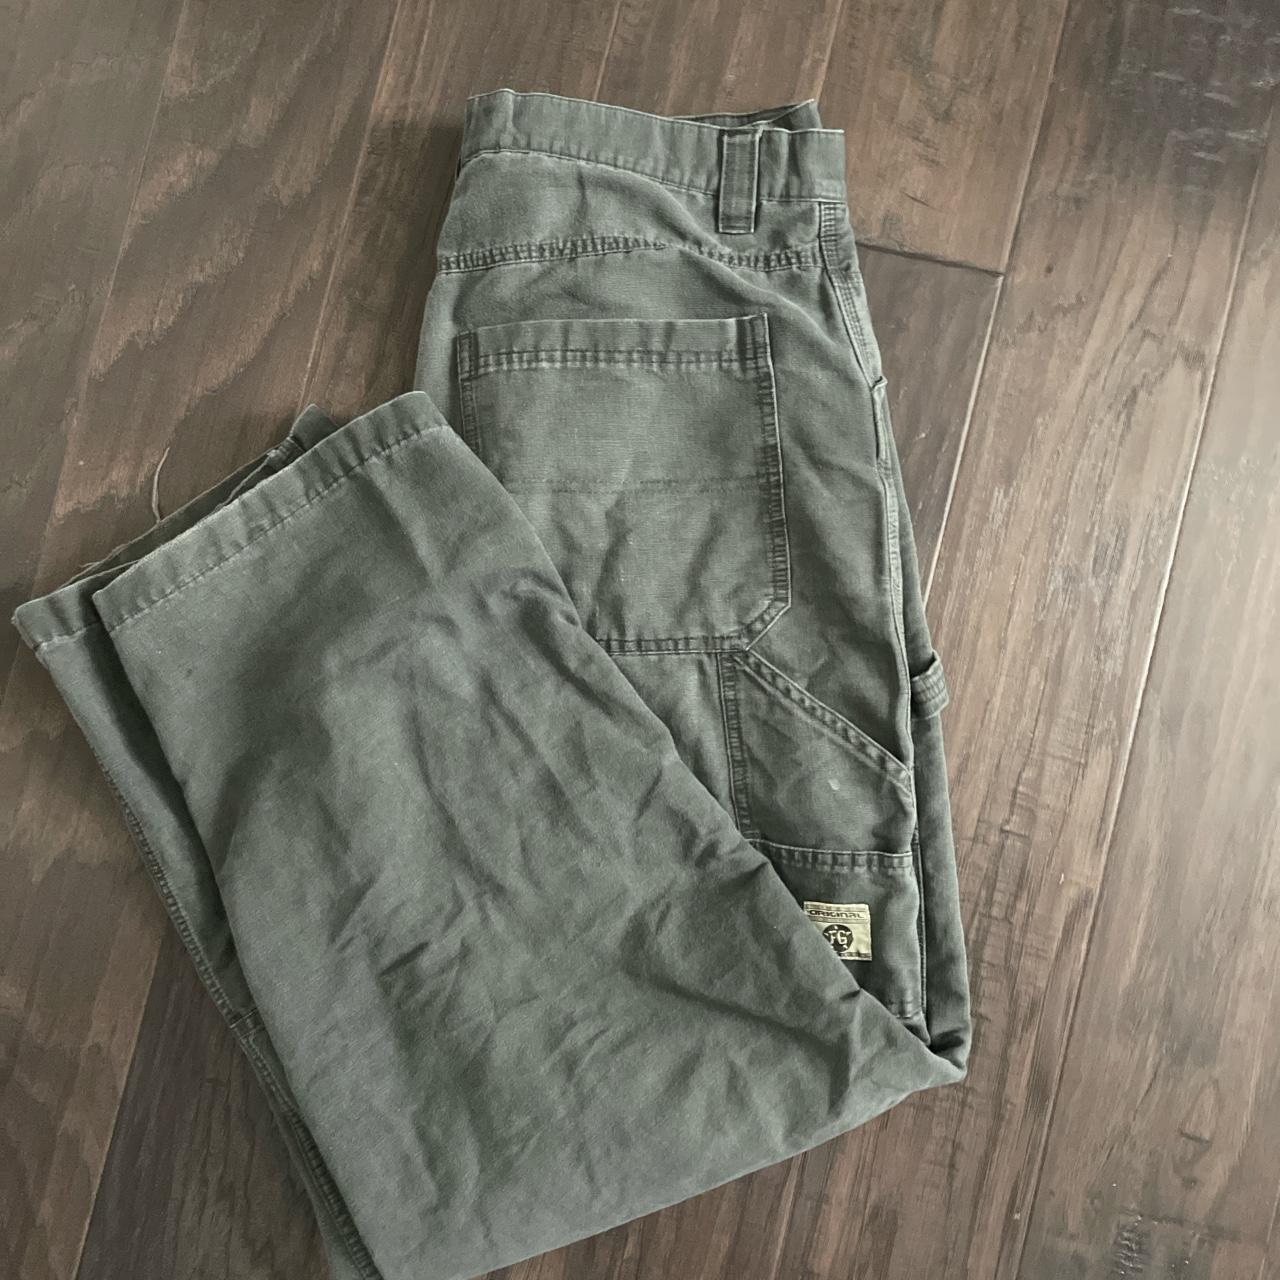 How to Protect New Chinos From Fading – StudioSuits